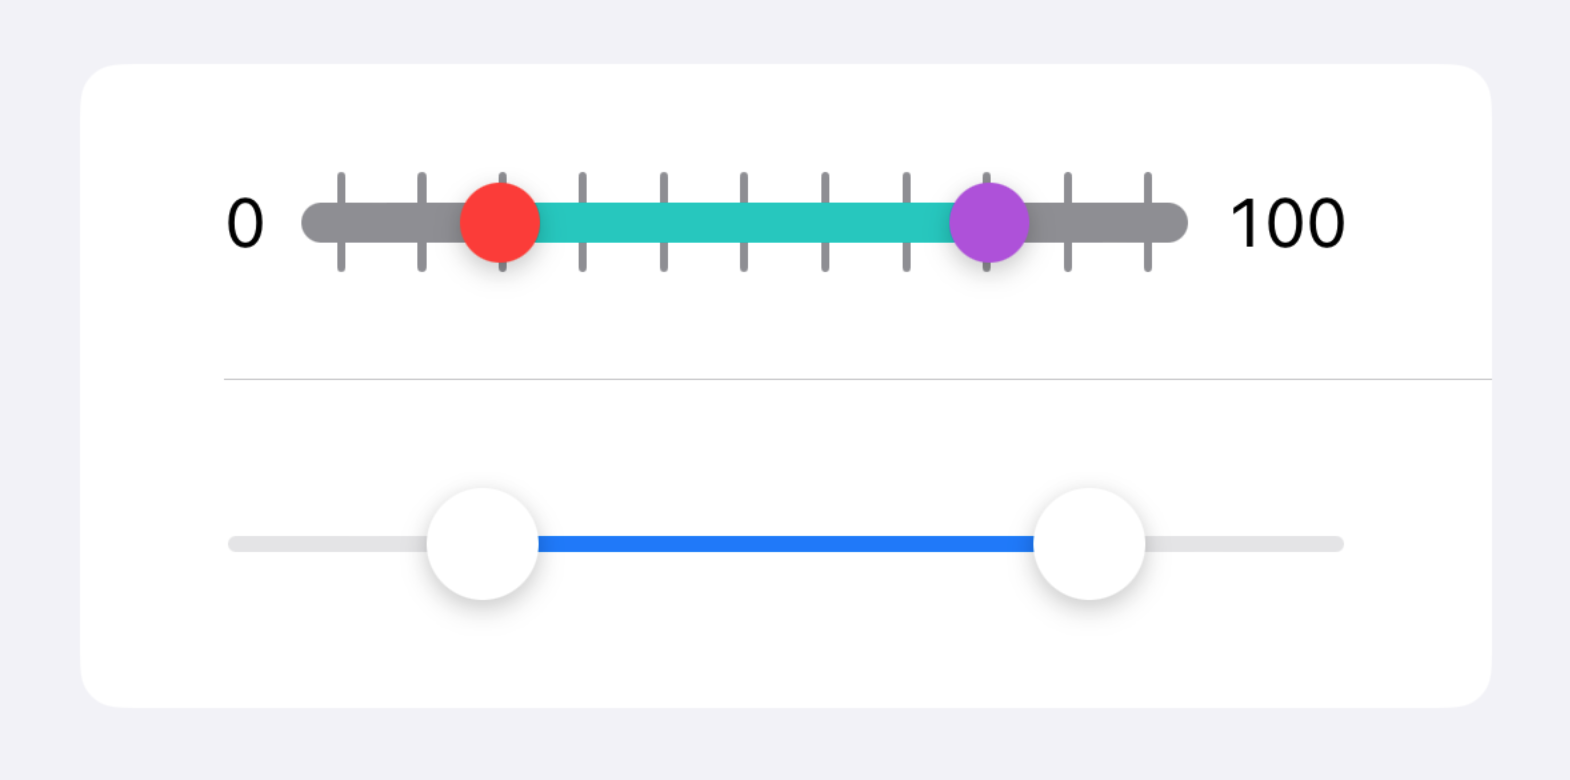 A custom SwiftUI slider control that allows for more customization than the standard Slider